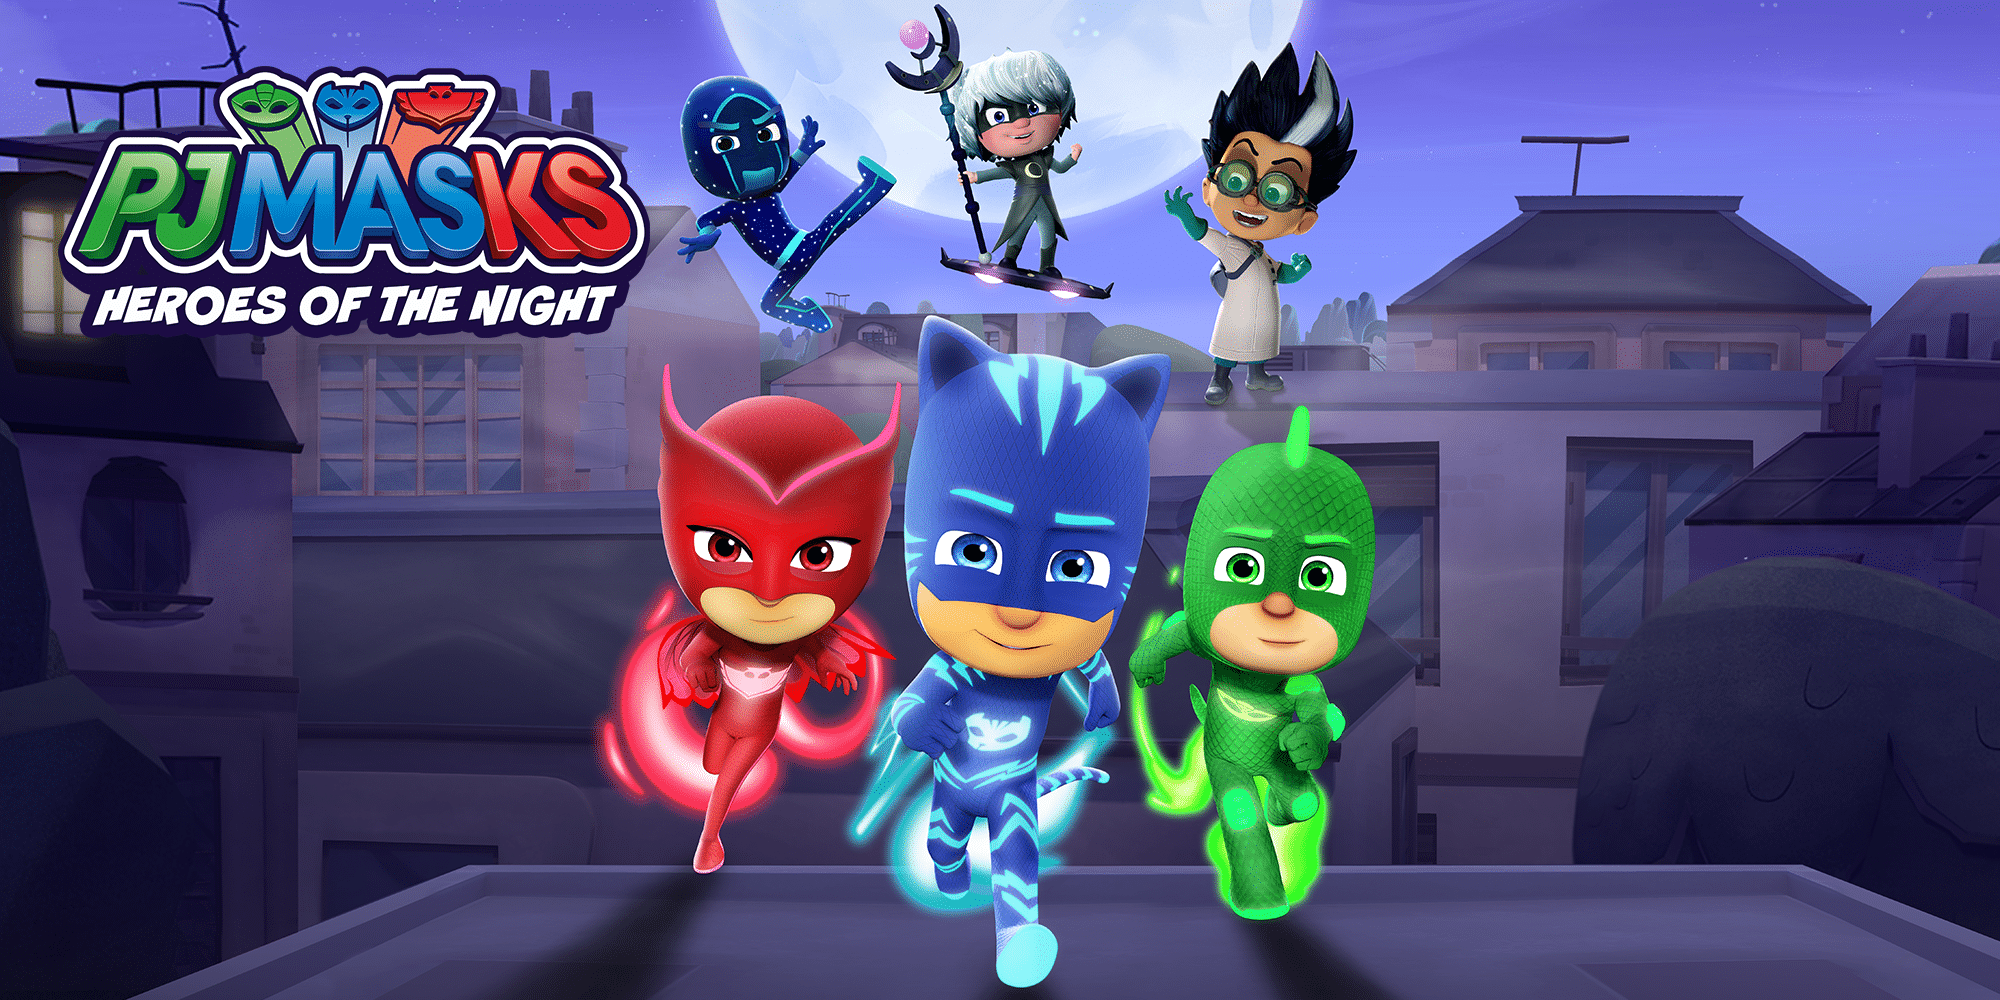 PJ MASKS: HEROES OF THE NIGHT is out today for next-gen console thumbnail